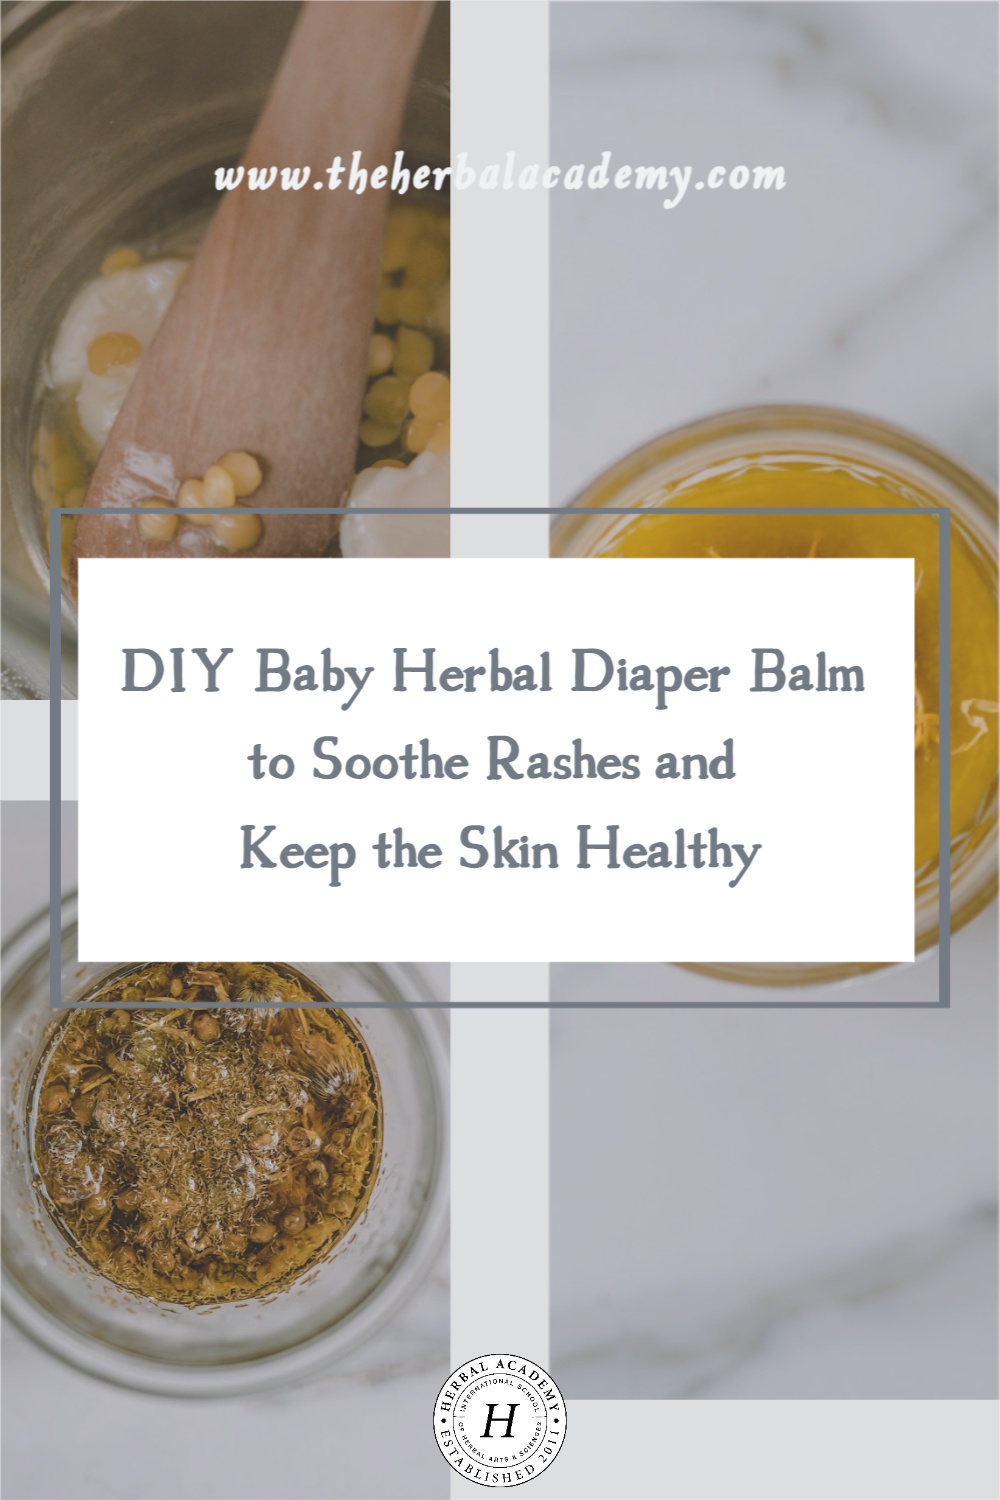 DIY Baby Herbal Diaper Balm to Soothe Rashes and Keep the Skin Healthy | Herbal Academy | A baby's skin is delicate and sensitive, so let's soothe it with natural ingredients. This lovely herbal diaper balm does just that!